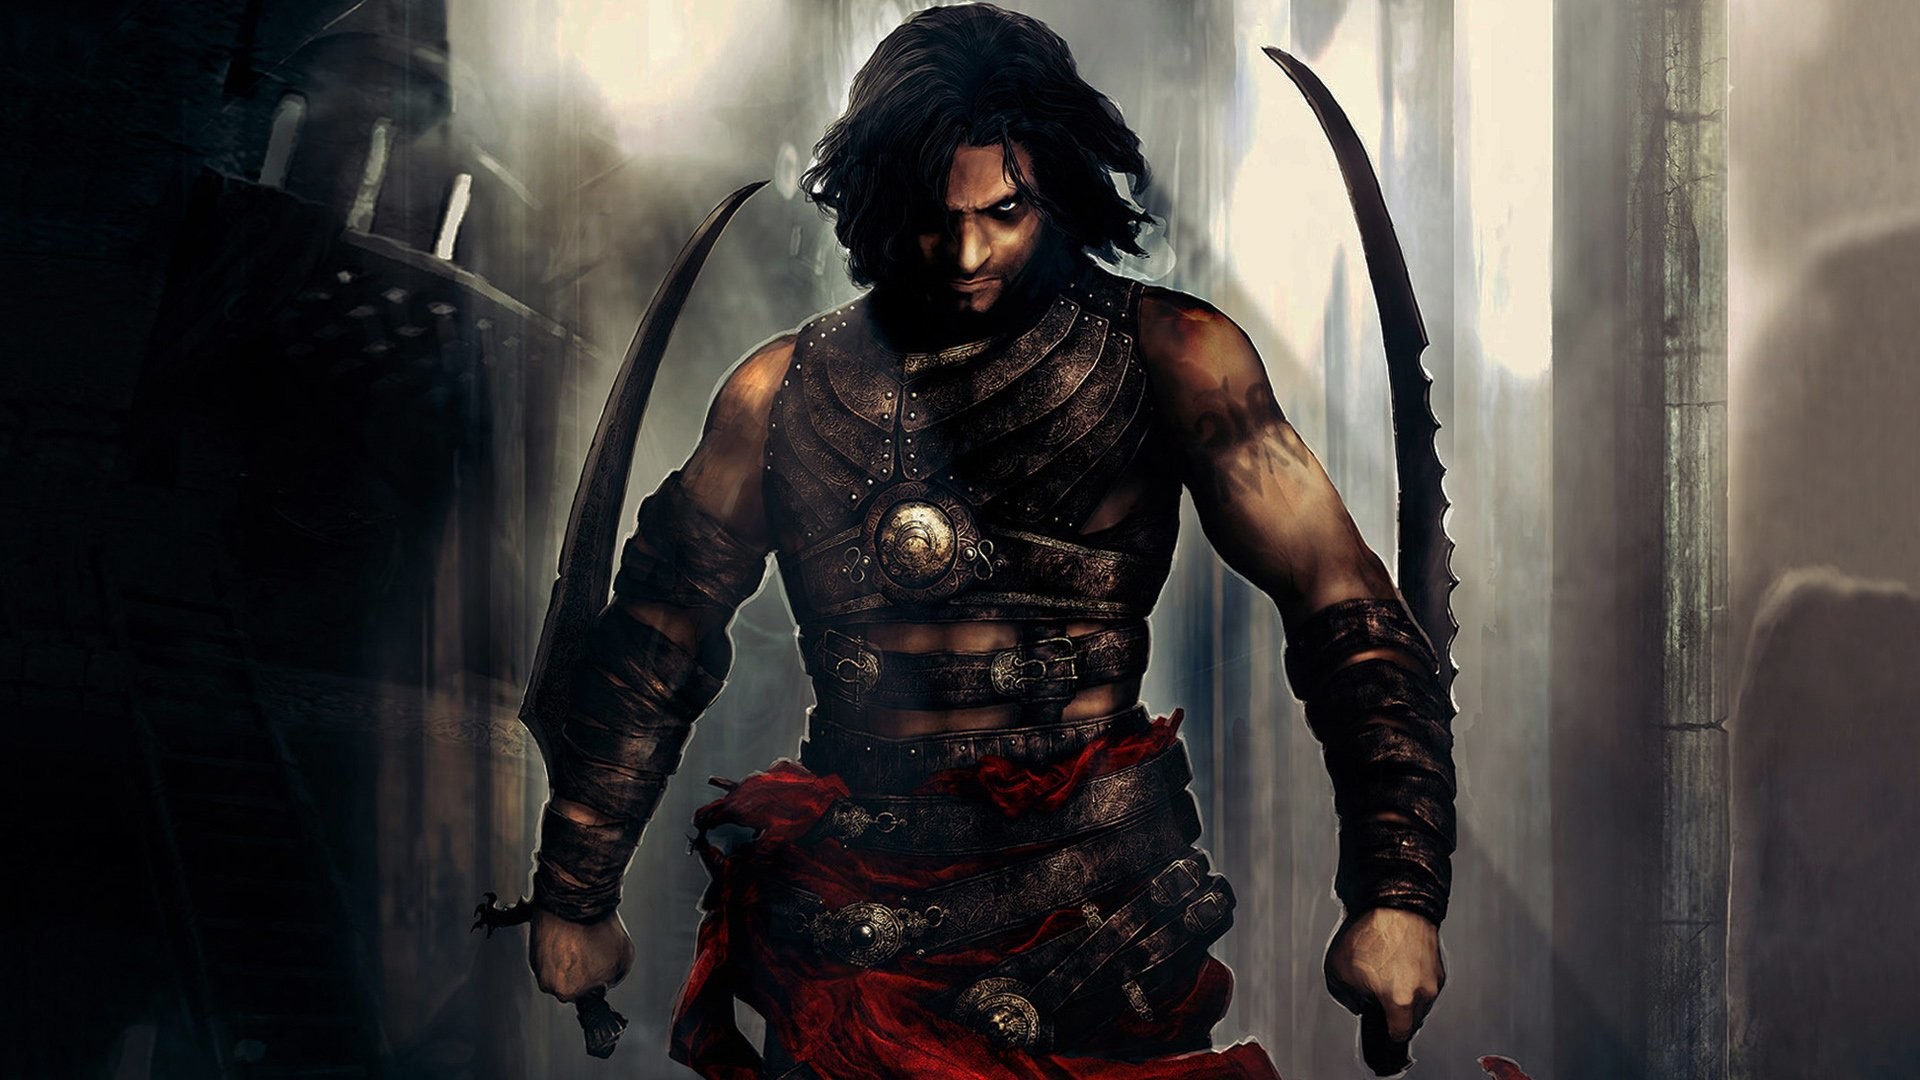 1920x1080 Computerspiele - Prince Of Persia: Warrior Within Krieger Persia Wallpaper